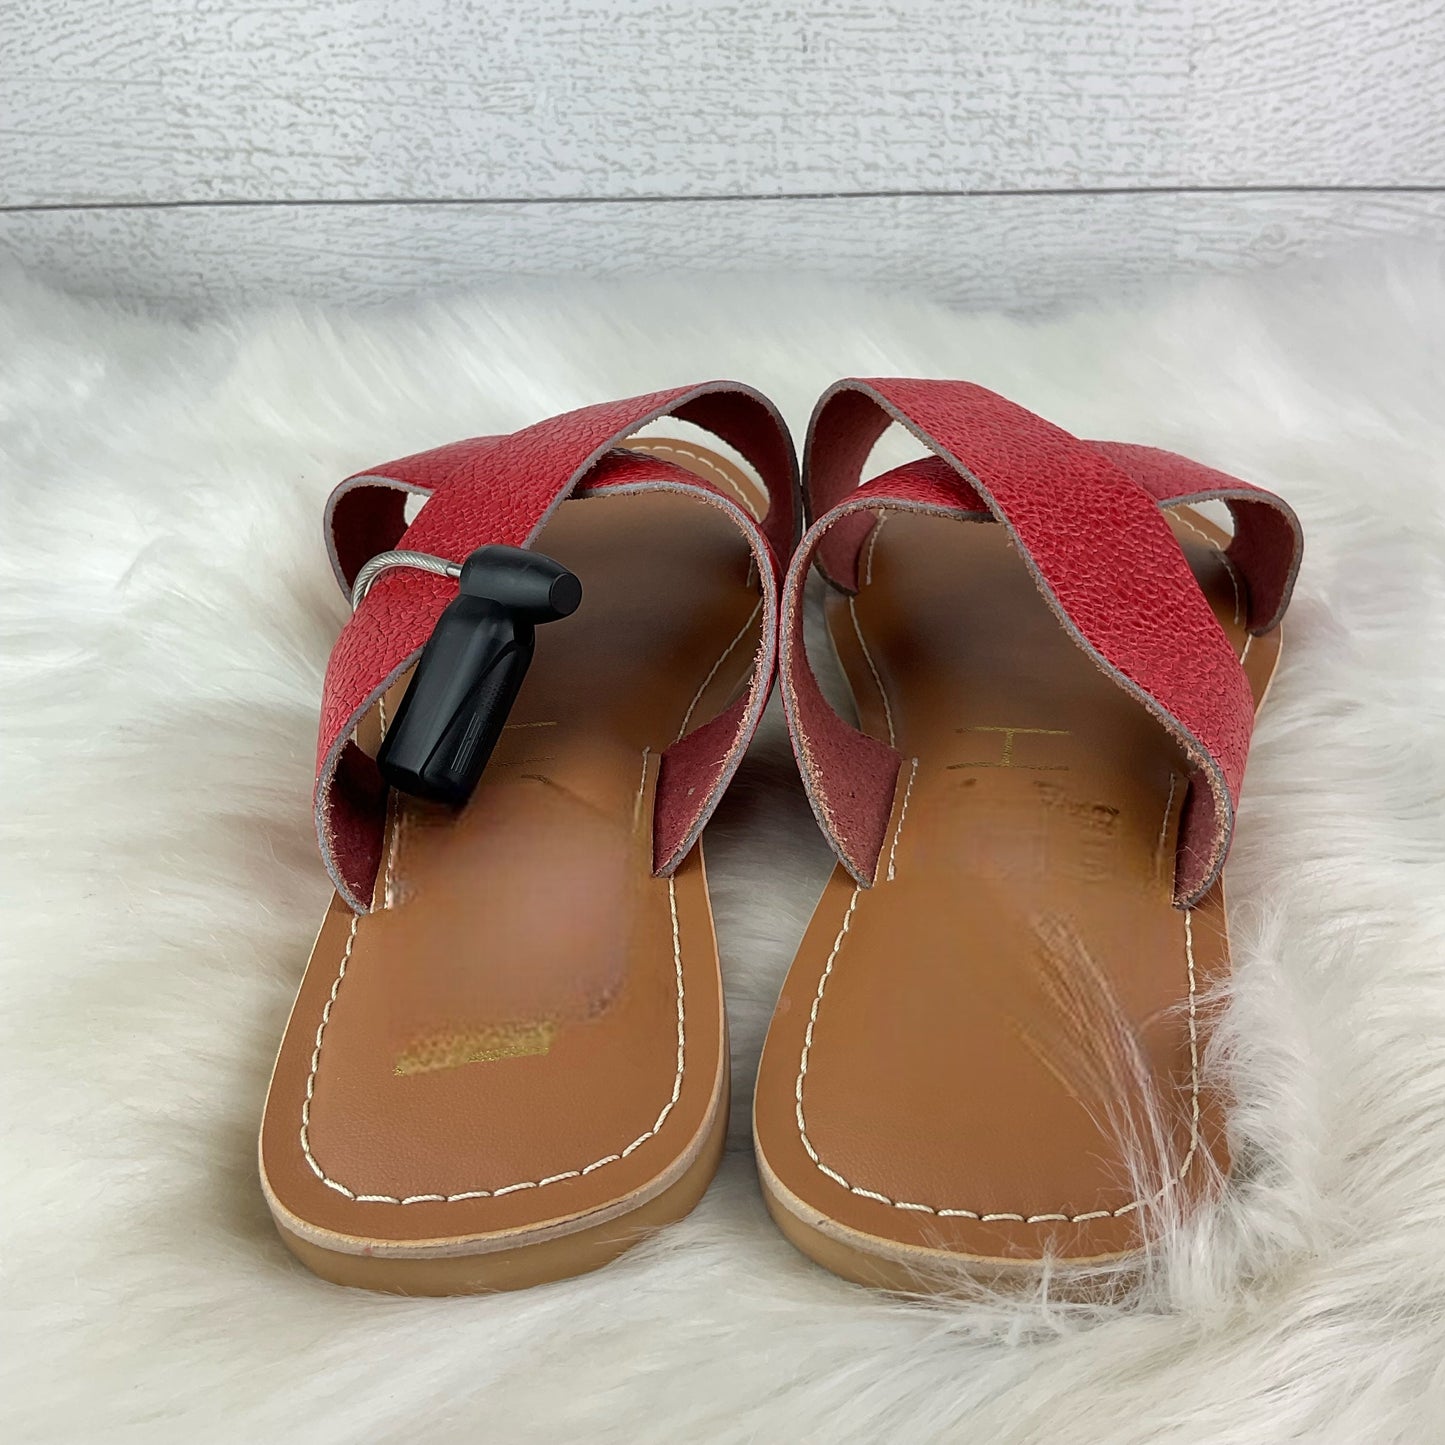 Red Sandals Flats Clothes Mentor, Size 8